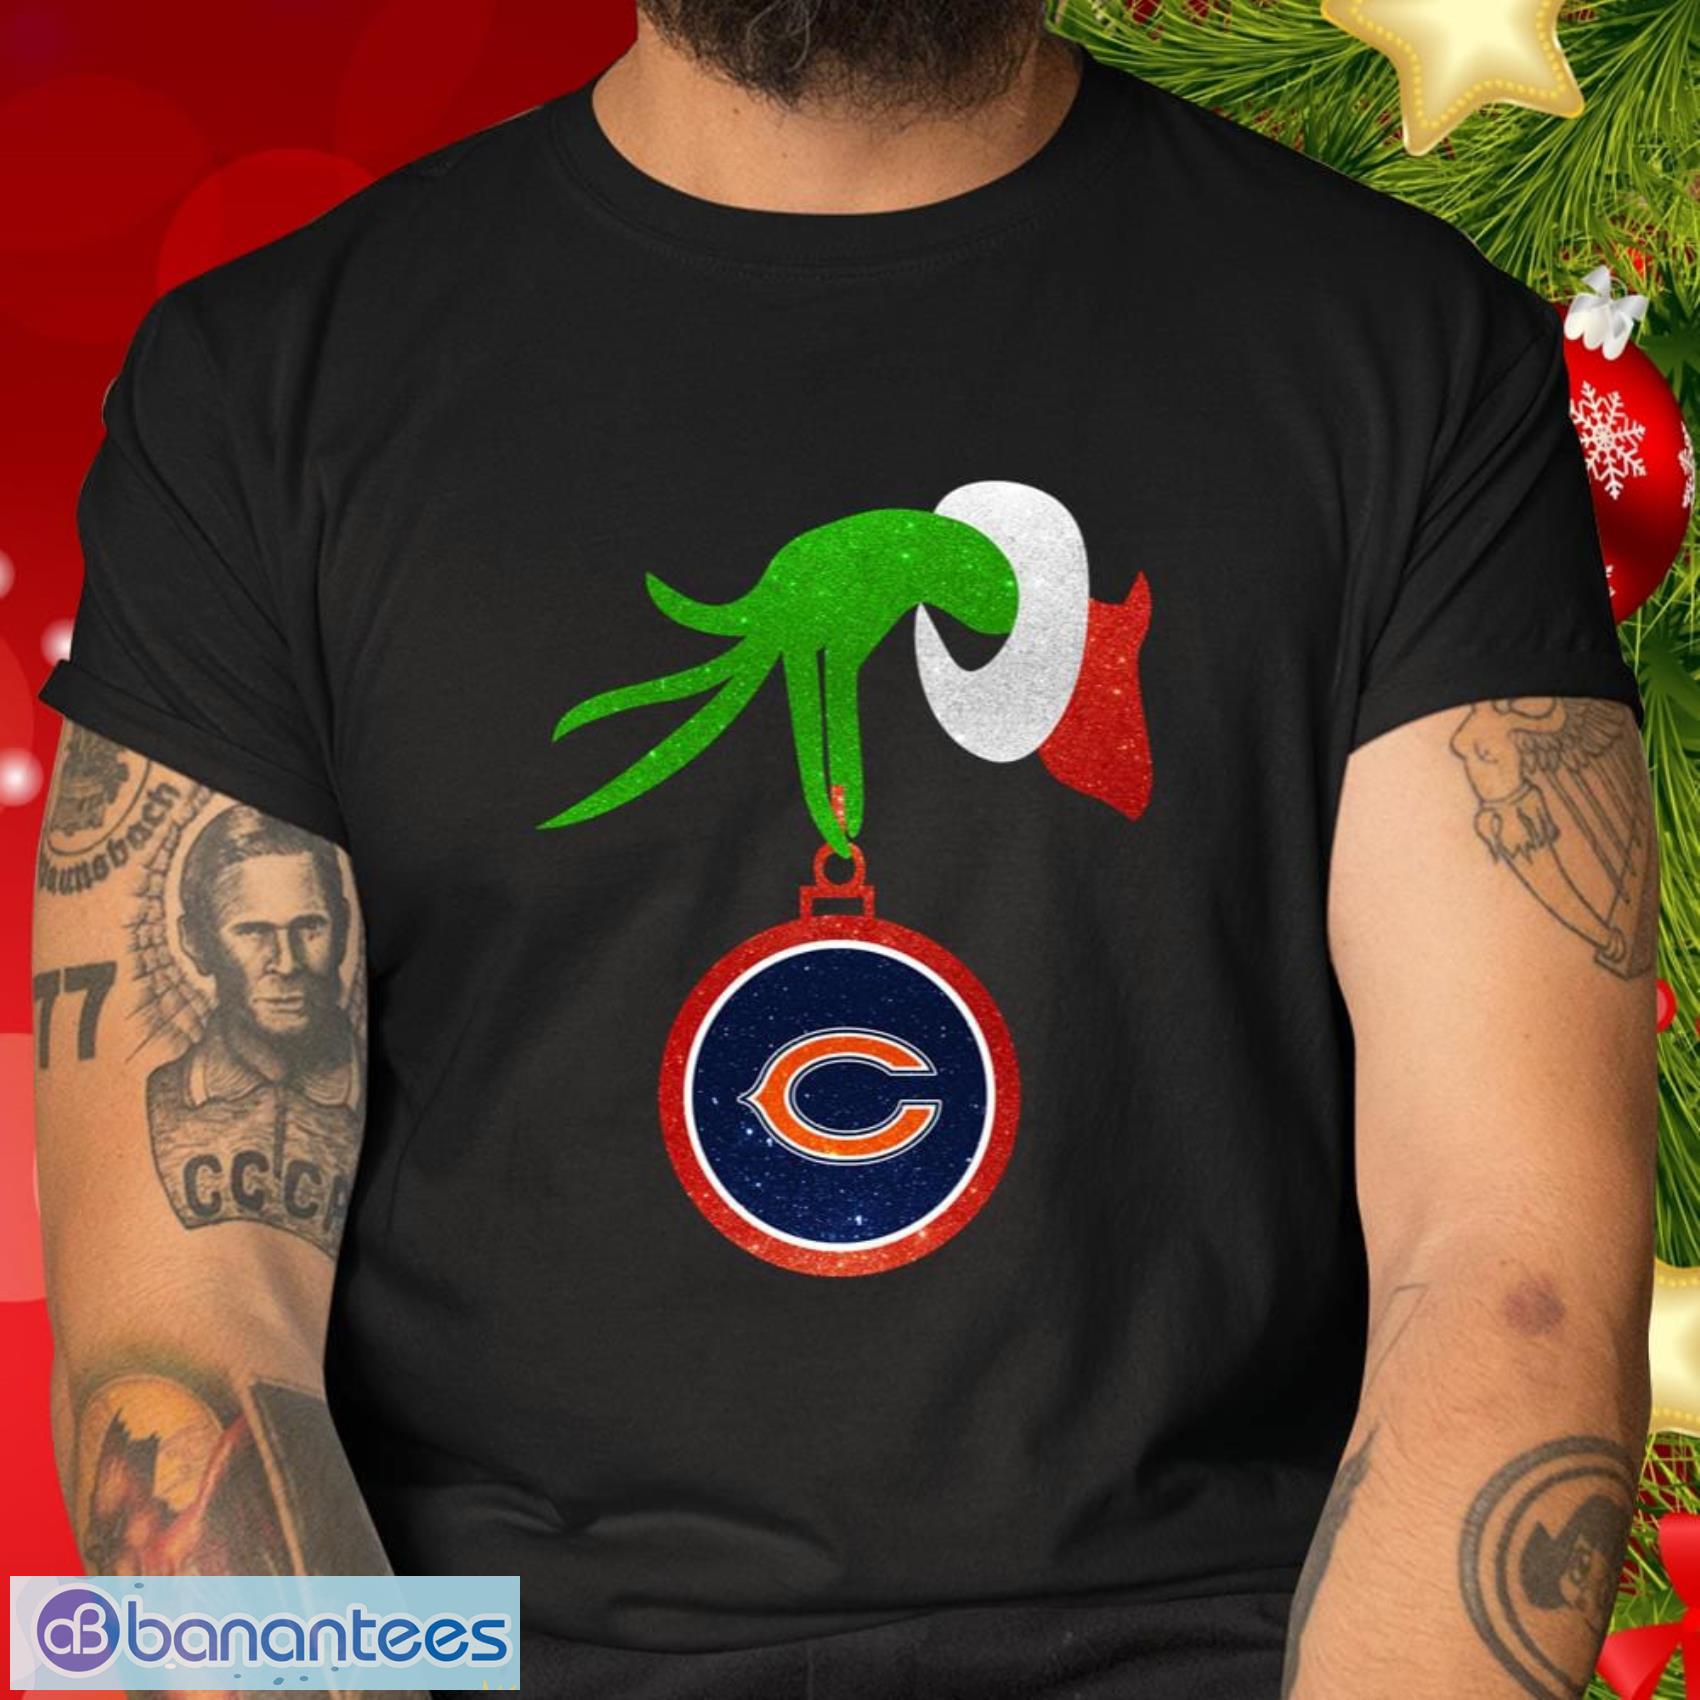 Chicago Bears Grinch Merry Christmas NFL Football Gift Fr Fans T Shirt - Chicago Bears Grinch Merry Christmas NFL Football T Shirt_2